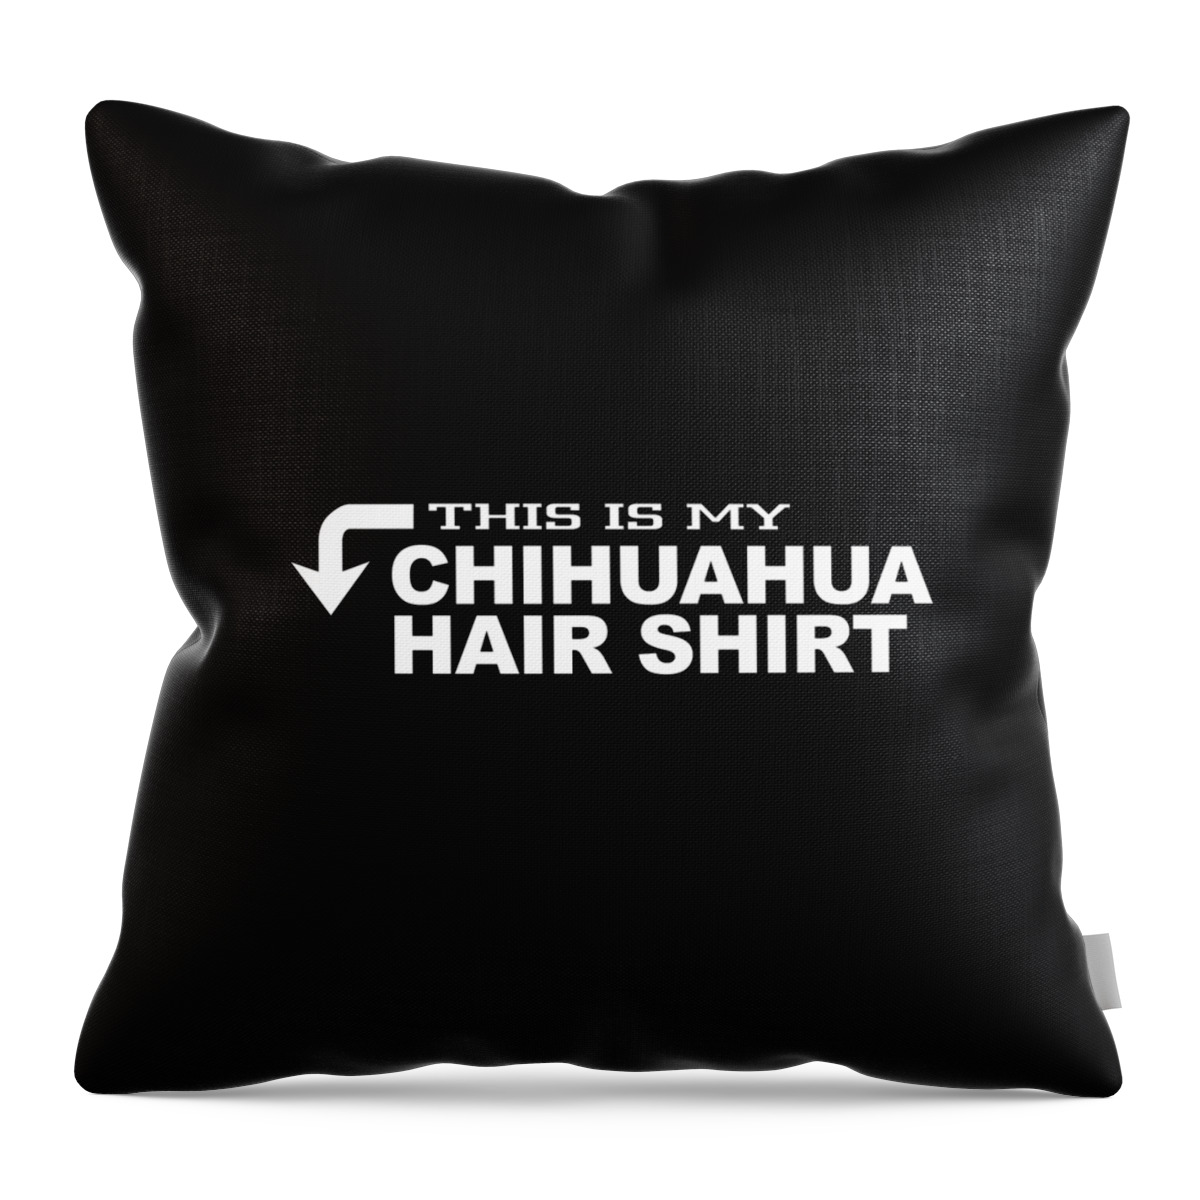 Chihuahua T-shirt Throw Pillow featuring the digital art Chihuahua Gift by Caterina Christakos